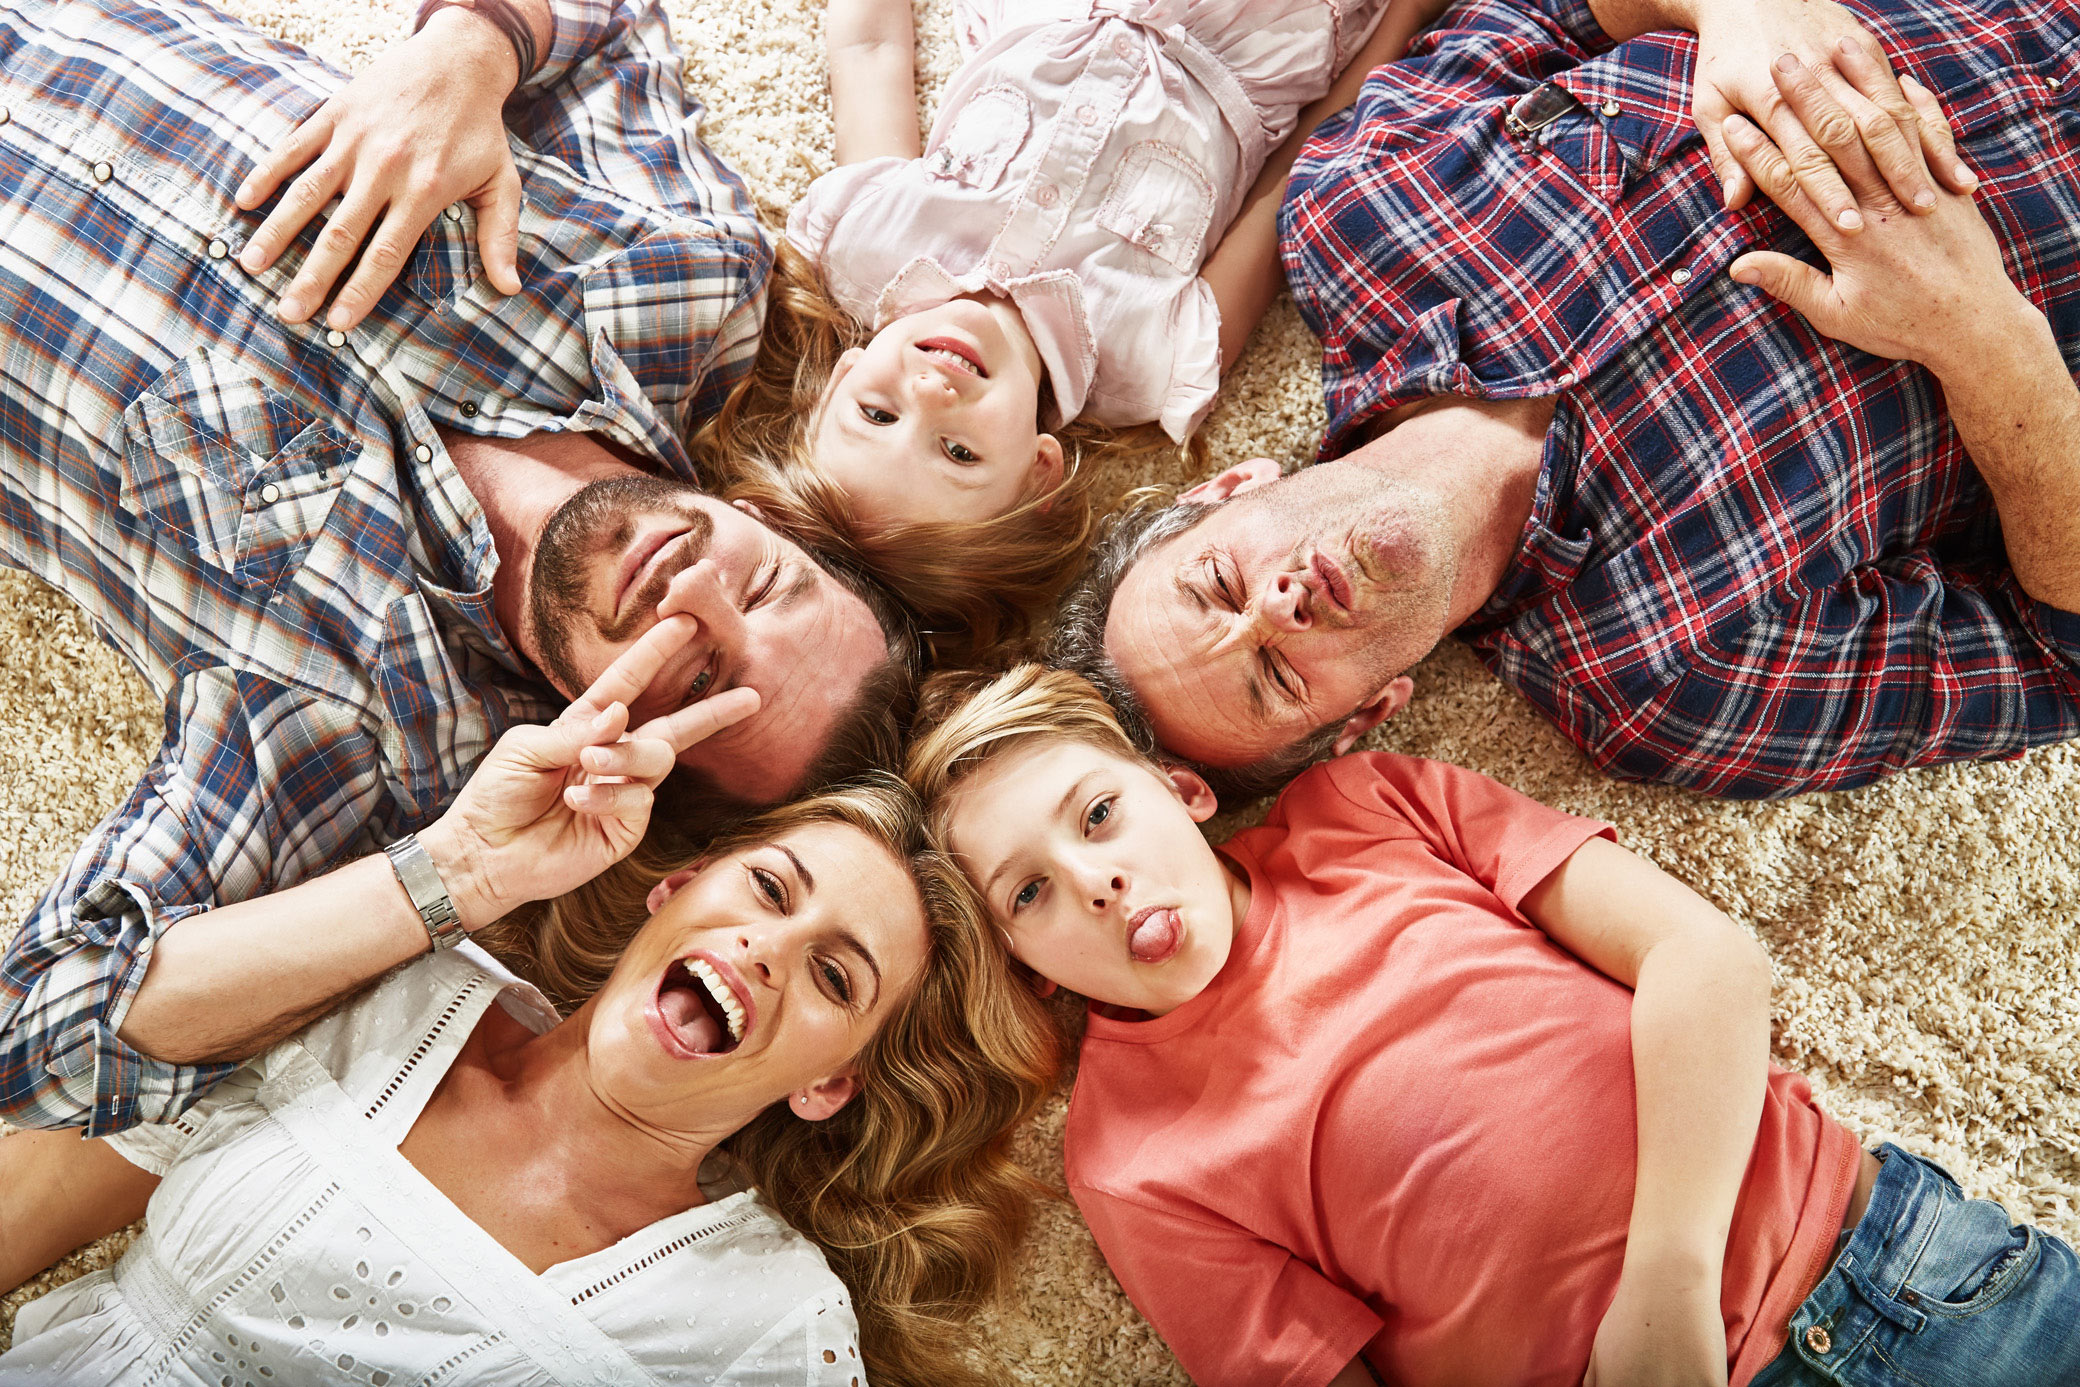 Lifestyle photographer - surrey, uk - family lying on ground smiling.  Photographed in the studio for Mobile phone company.  Images used in advertising and marketing.